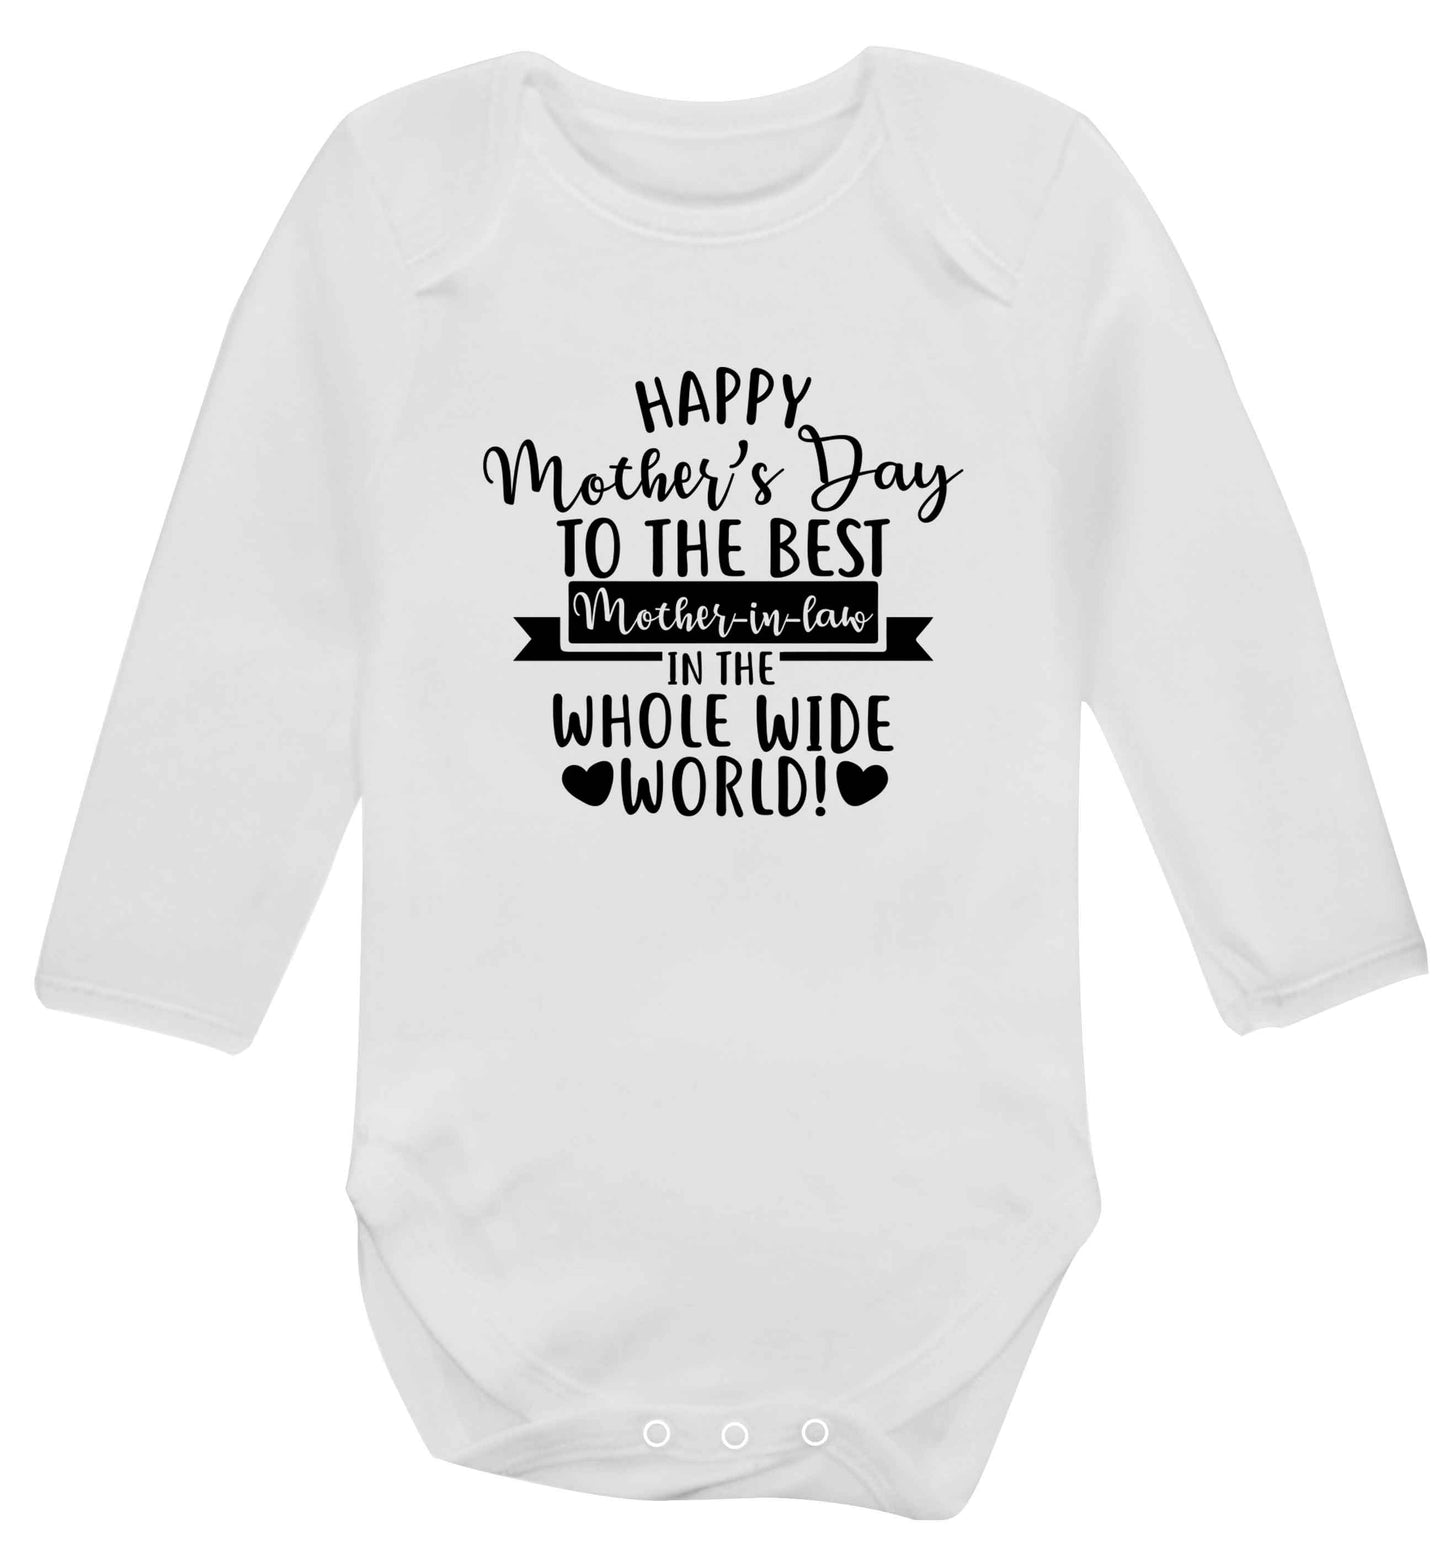 Happy mother's day to the best mother-in law in the world baby vest long sleeved white 6-12 months